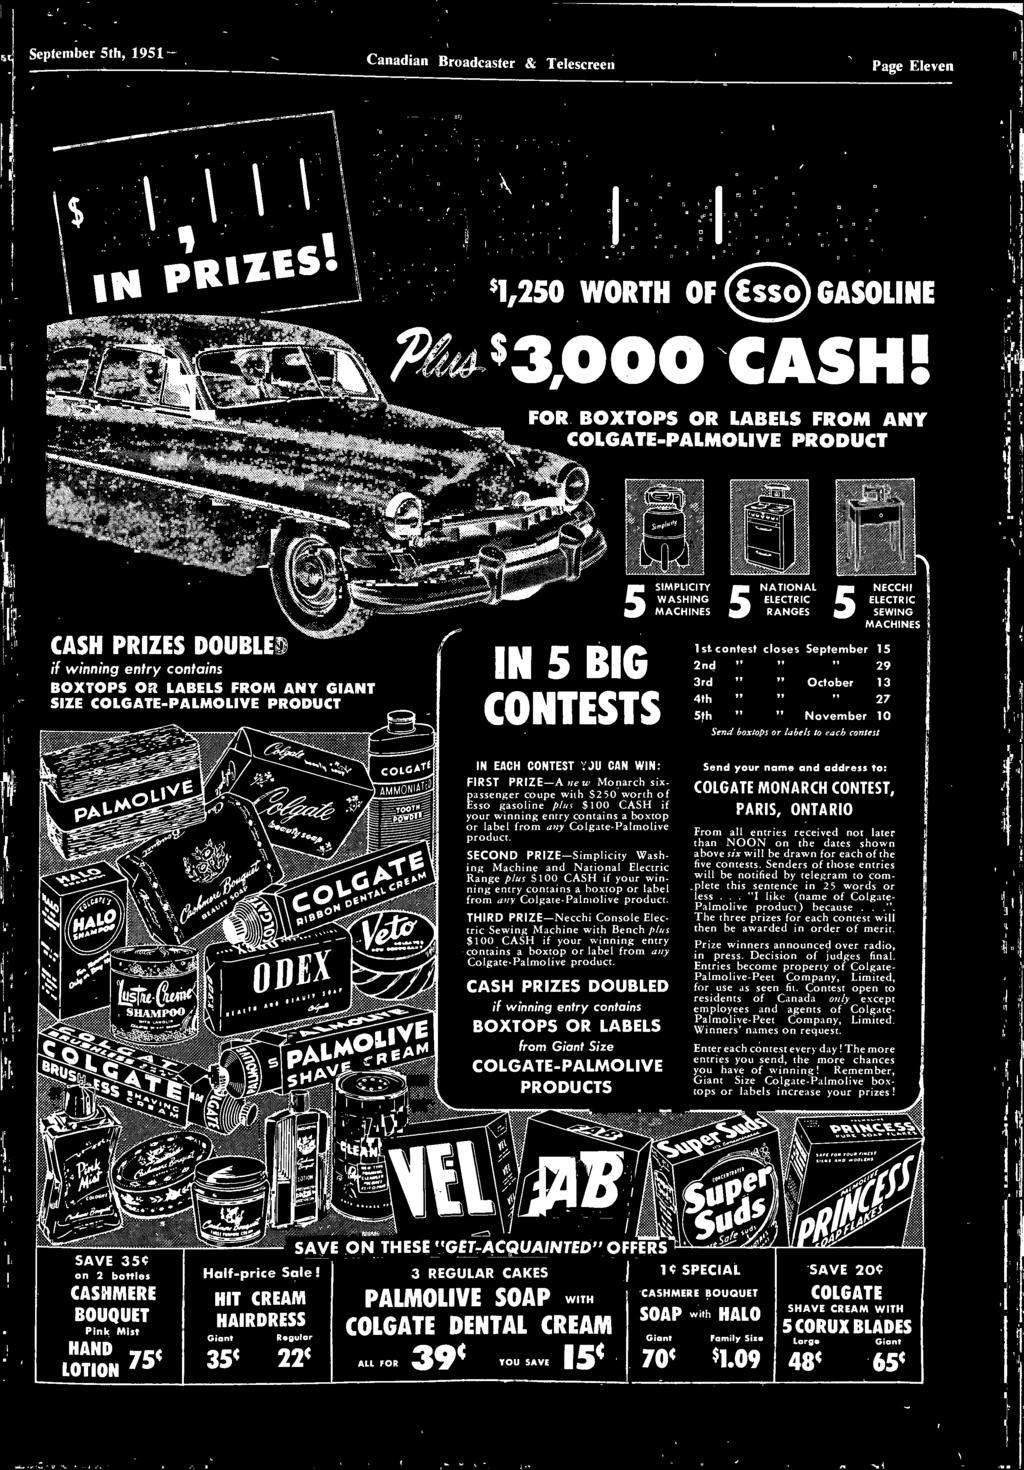 JU CAN WIN: FIRST PRIZE-A new Monrch six - pssenger coupe with $250 worth of Esso gsoline plus $100 CASH if your winning entry contins boxtop or lbel from ny Colgte-Plmolive product.